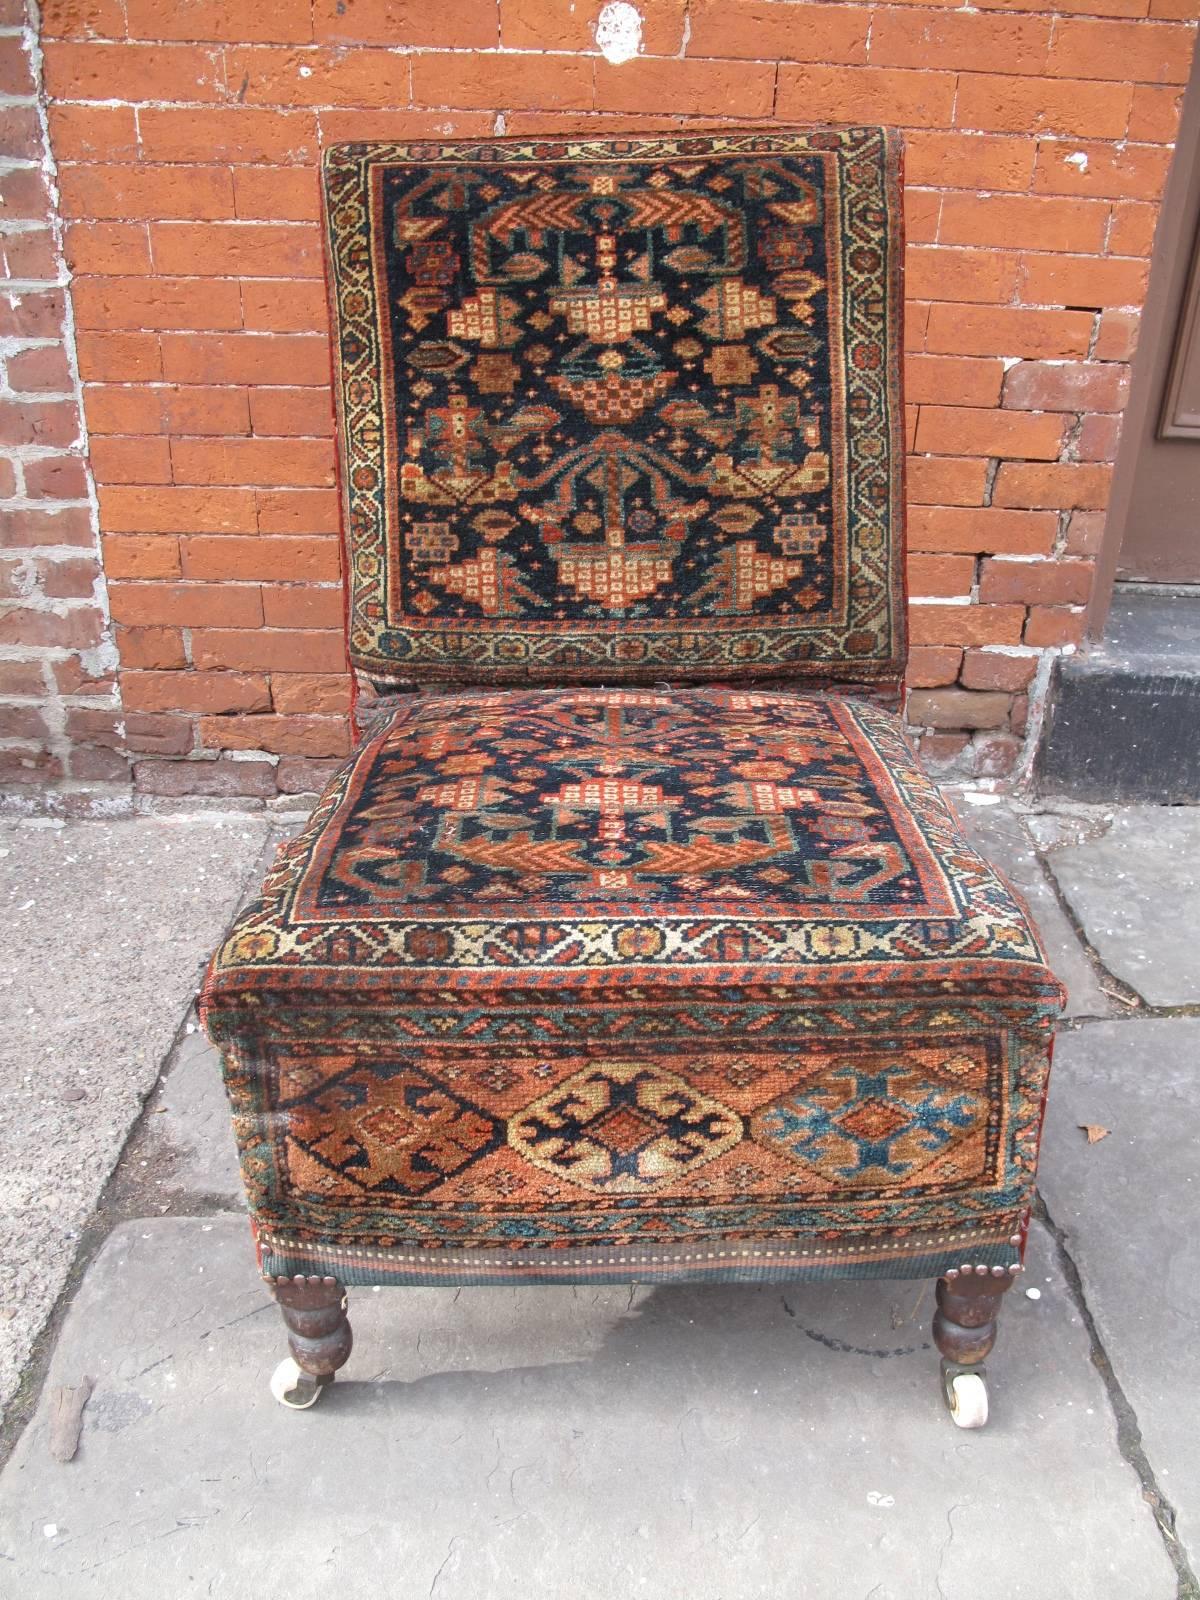 1890s armless chair upholstered in mohair velvet and wool carpet remnants. Ceramic casters on turned legs. Nailhead details.